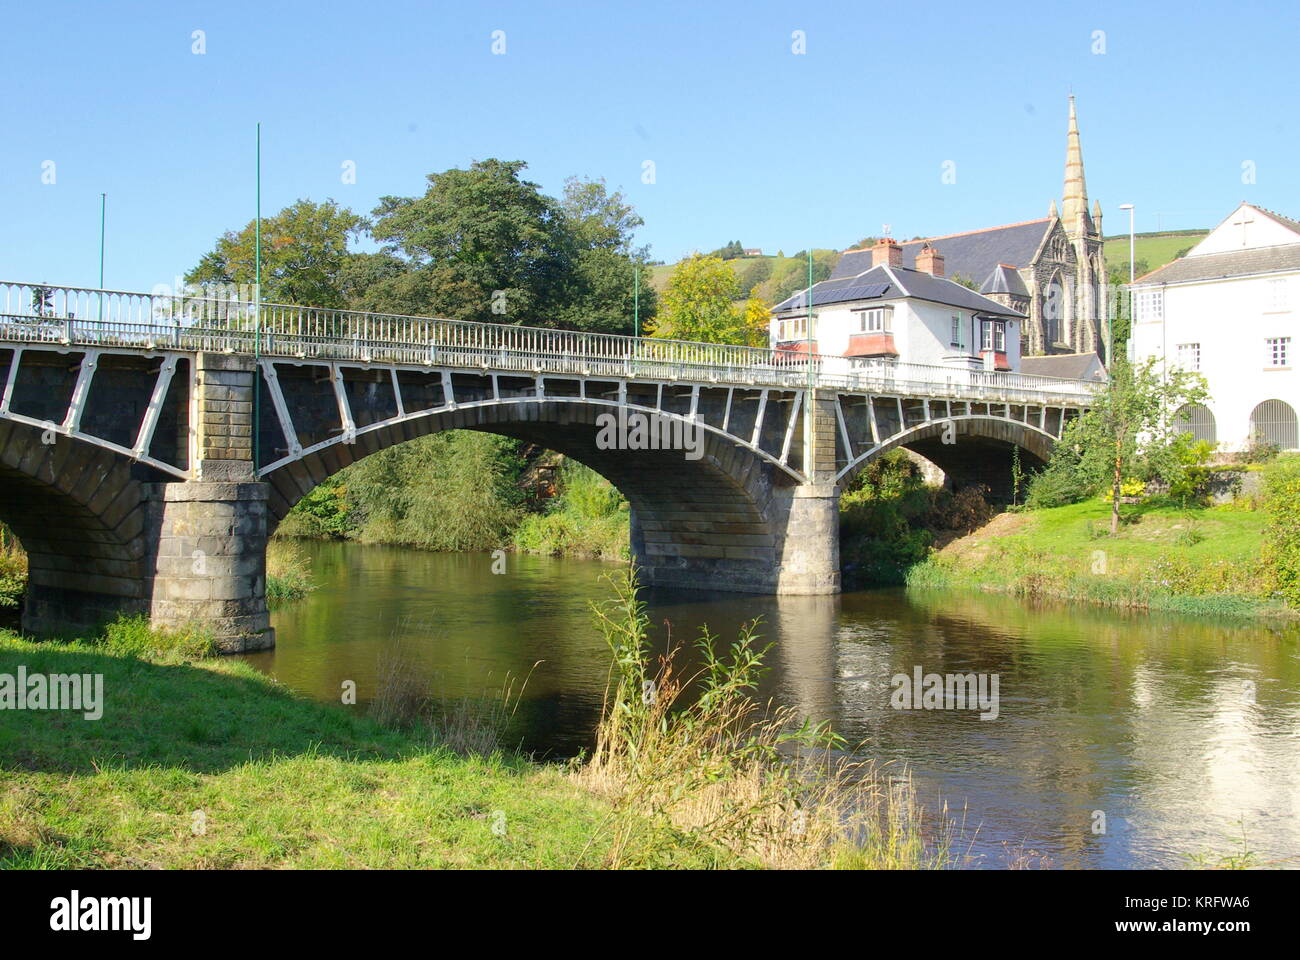 Bridge, known as the Long Bridge, over the River Severn at Newtown, Powys, Wales.      Date: 2011 Stock Photo